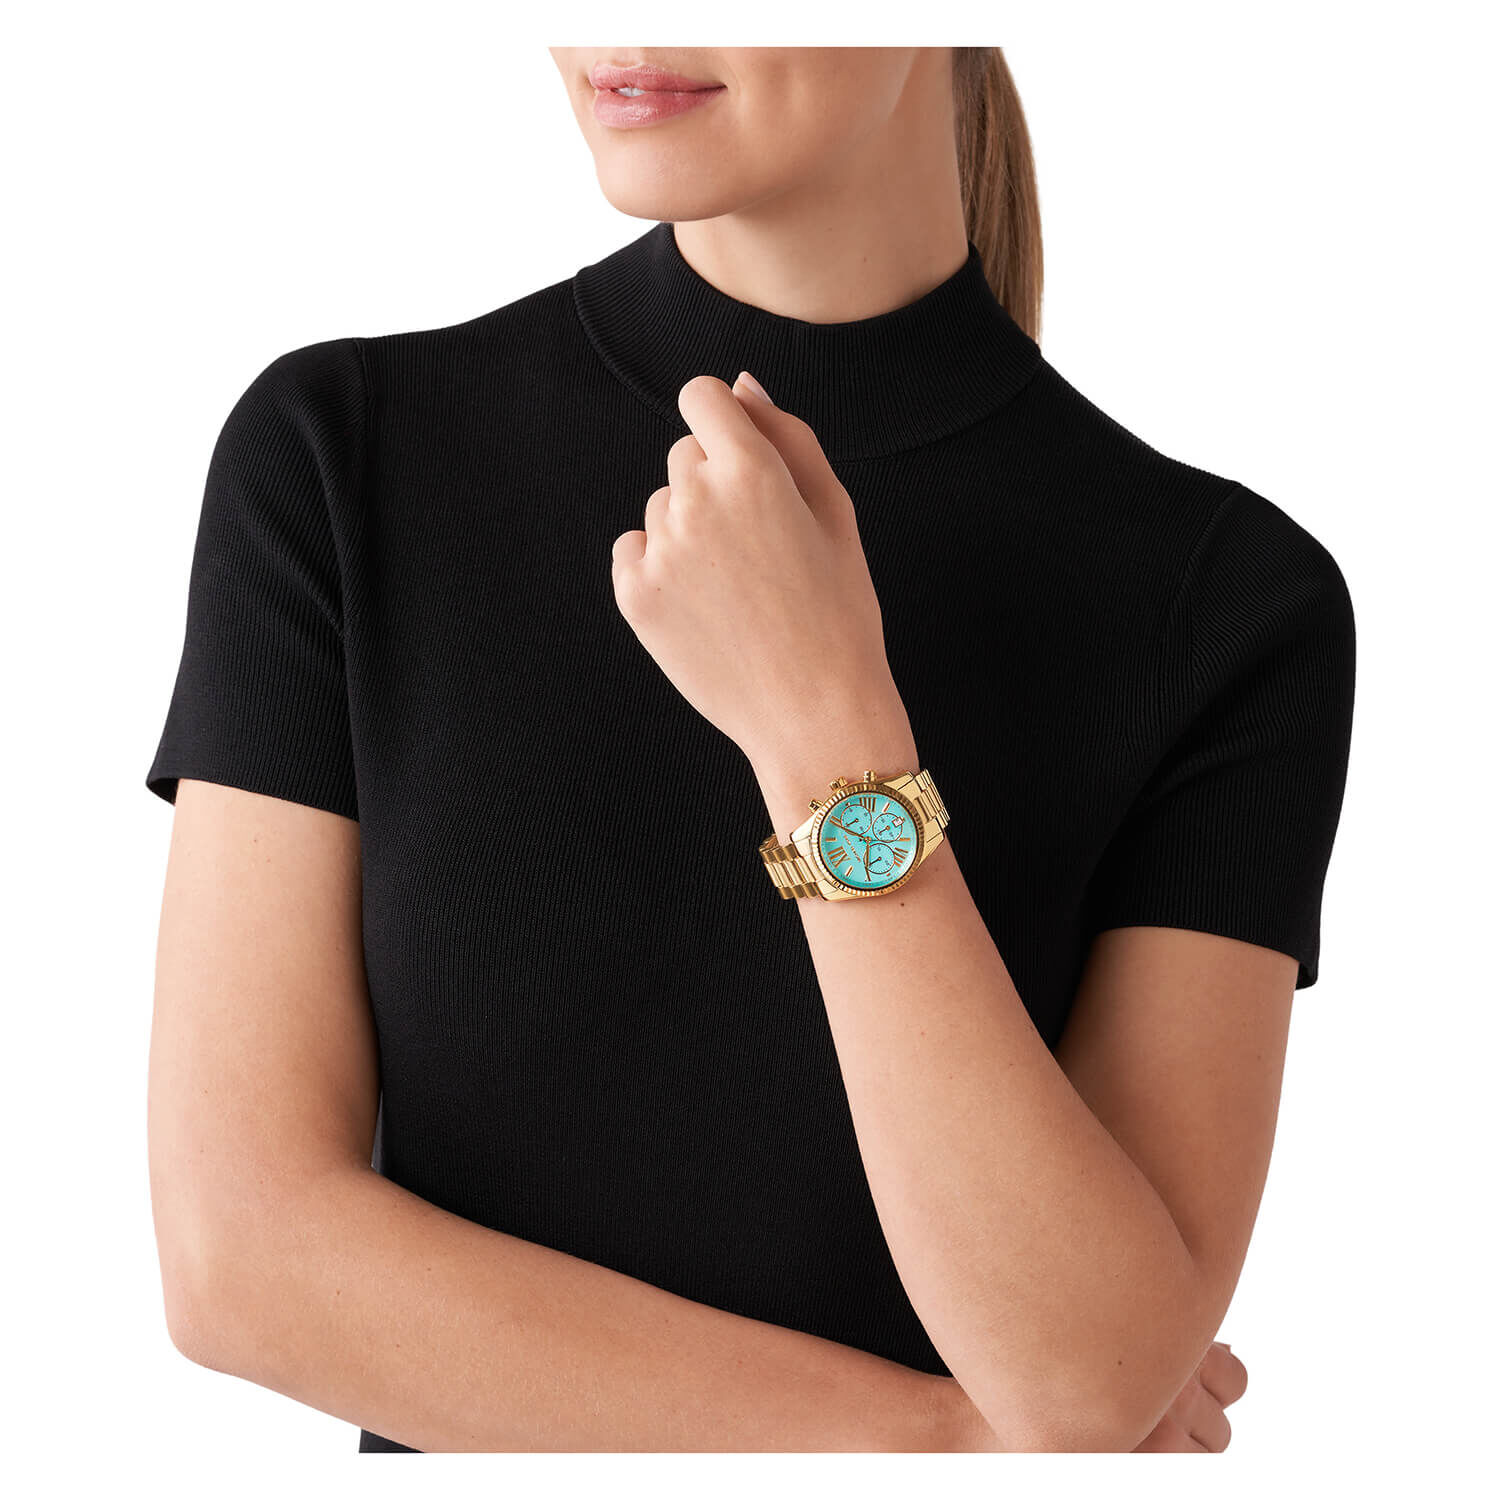 Watch Michael Kors Turquoise In Gold And Steel 29249136